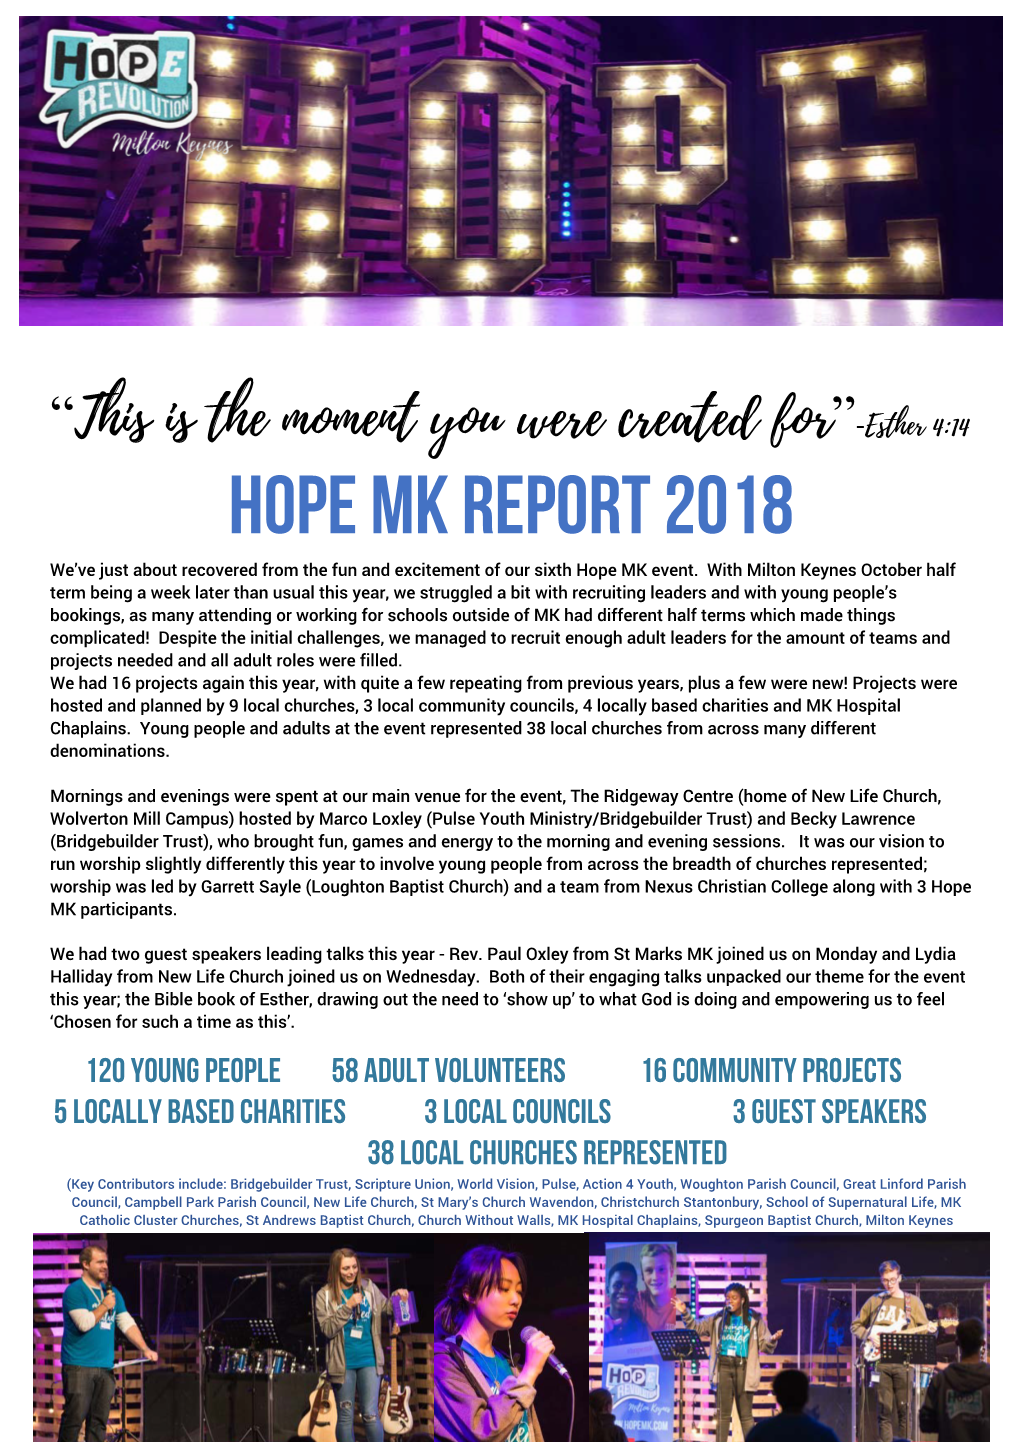 Hope MK Report 2018 We’Ve Just About Recovered from the Fun and Excitement of Our Sixth Hope MK Event